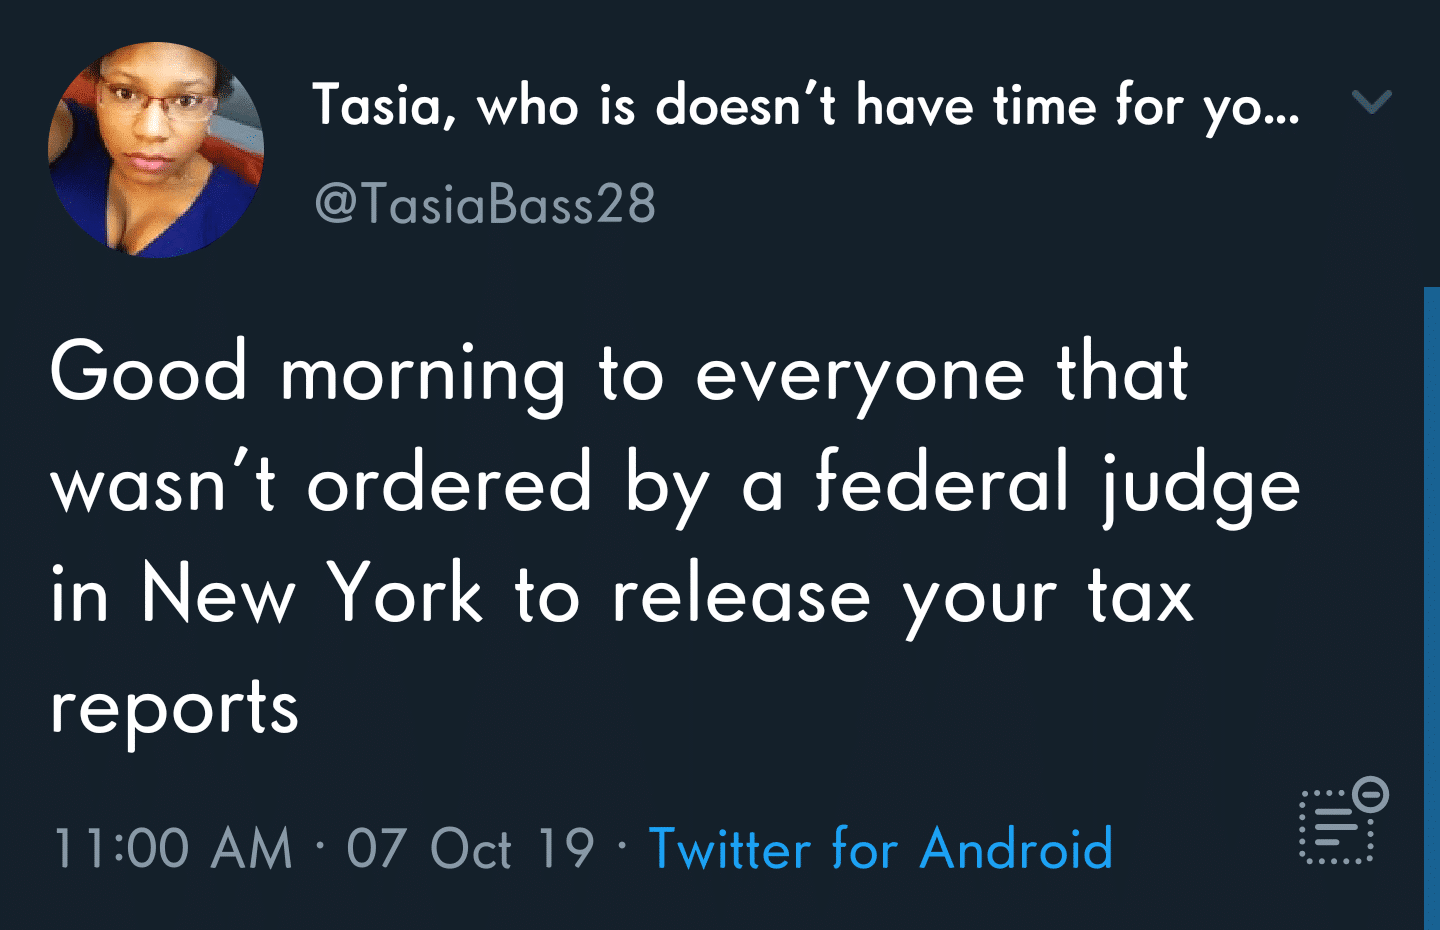 political political-memes political text: Tasia, who is doesn't have time for yo... @TasiaBass28 Good morning to everyone that wasn't ordered by a federal judge in New York to release your tax reports 1 1:00 AM • 07 Oct 19 • Twitter for Android 